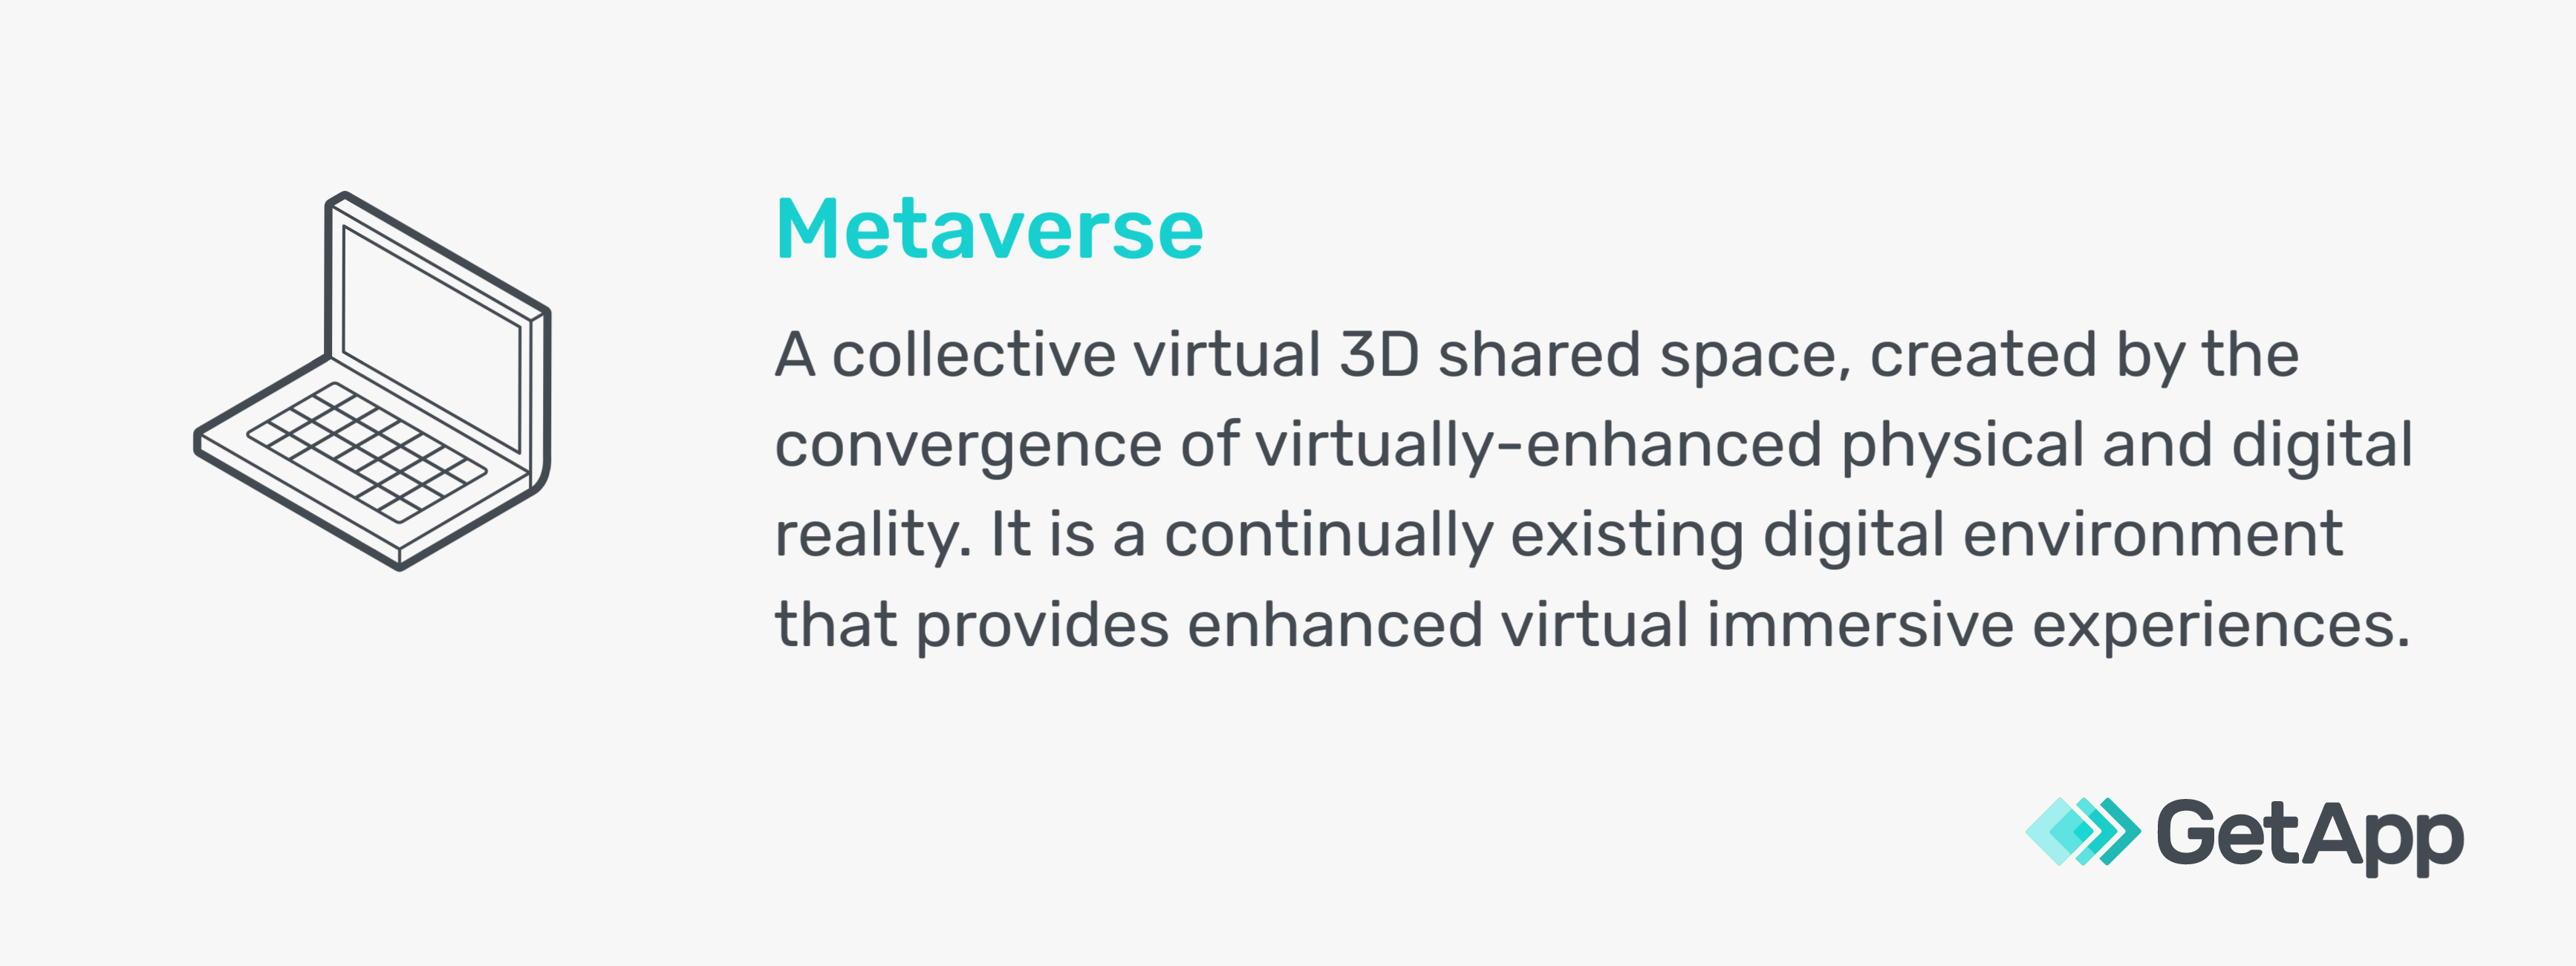 what is the metaverse? definition